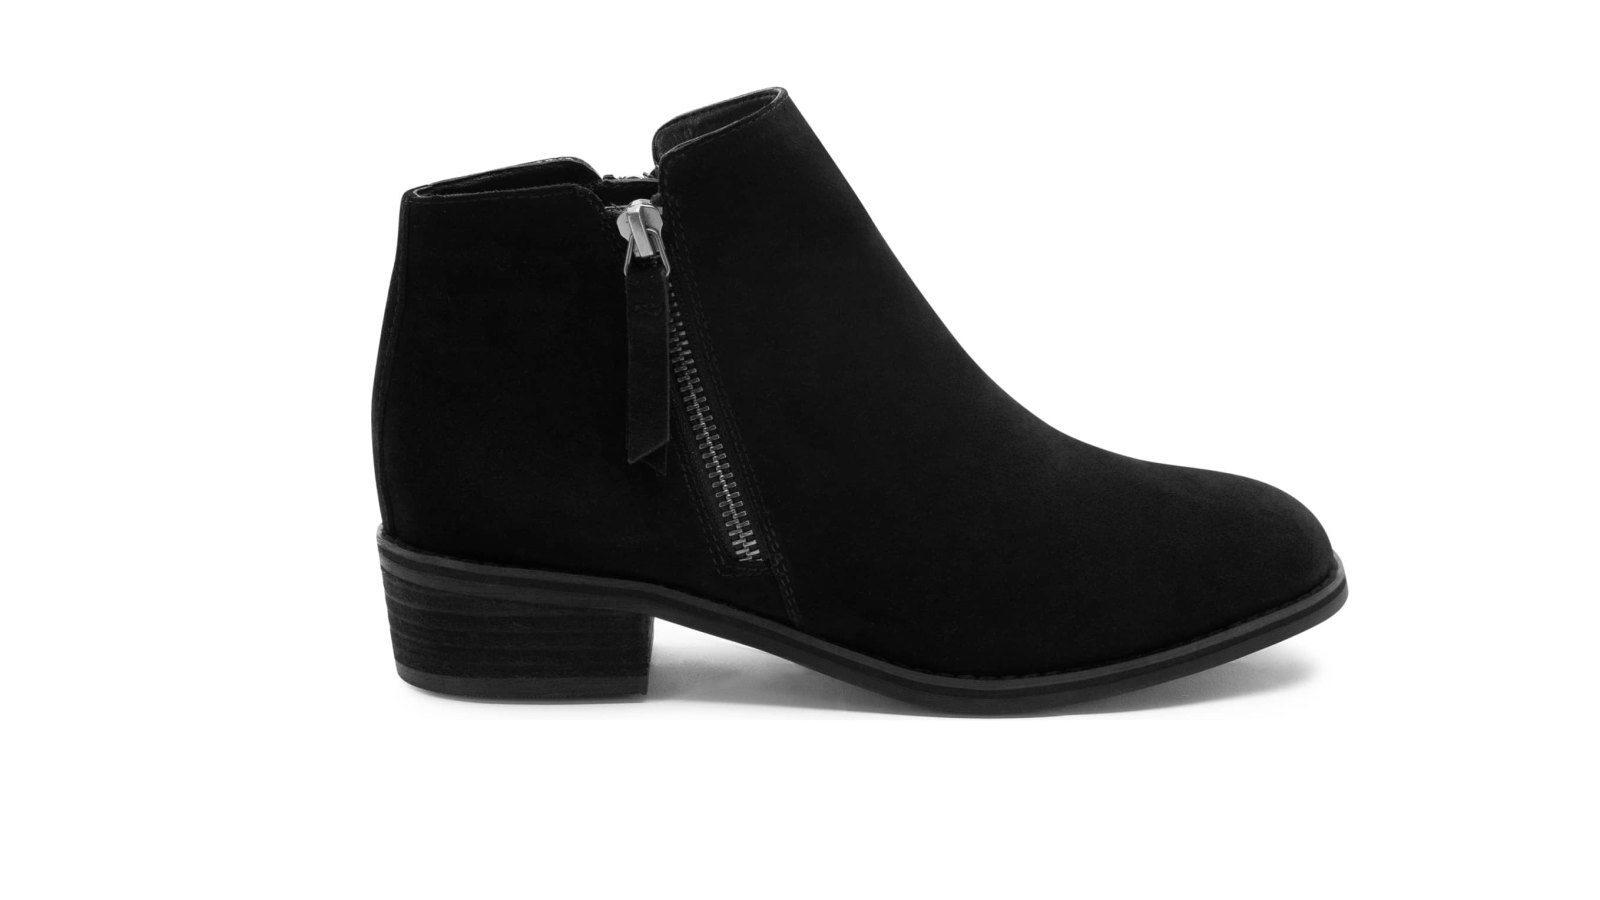 Nordstrom Holiday 2018 Blondo booties